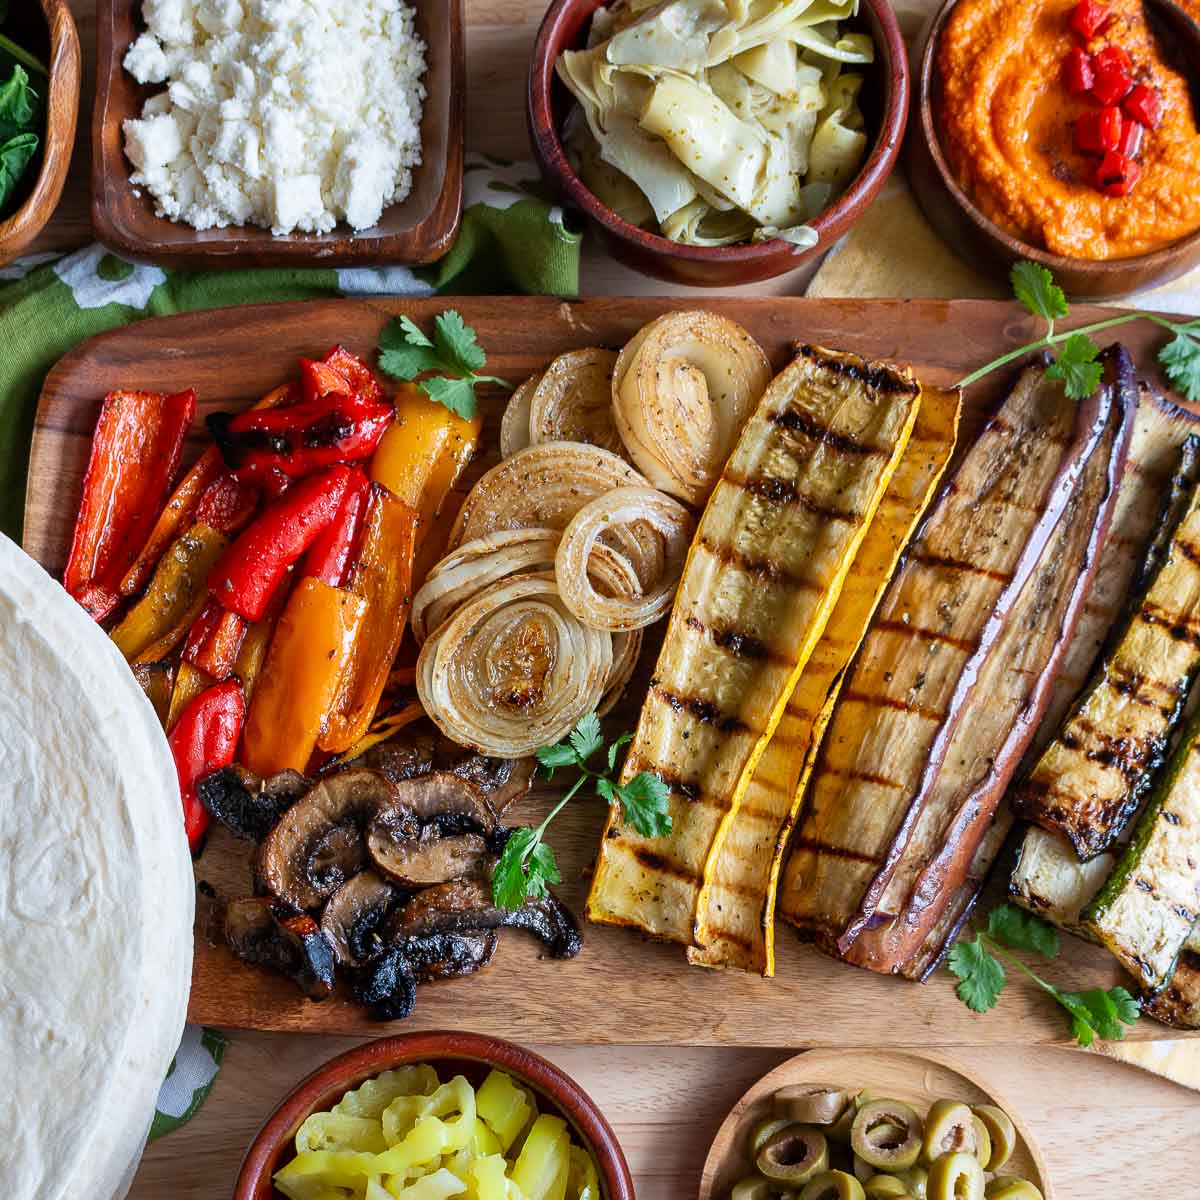 Grilled vegetables and all the toppings laid out on the table to assemble your own wrap.